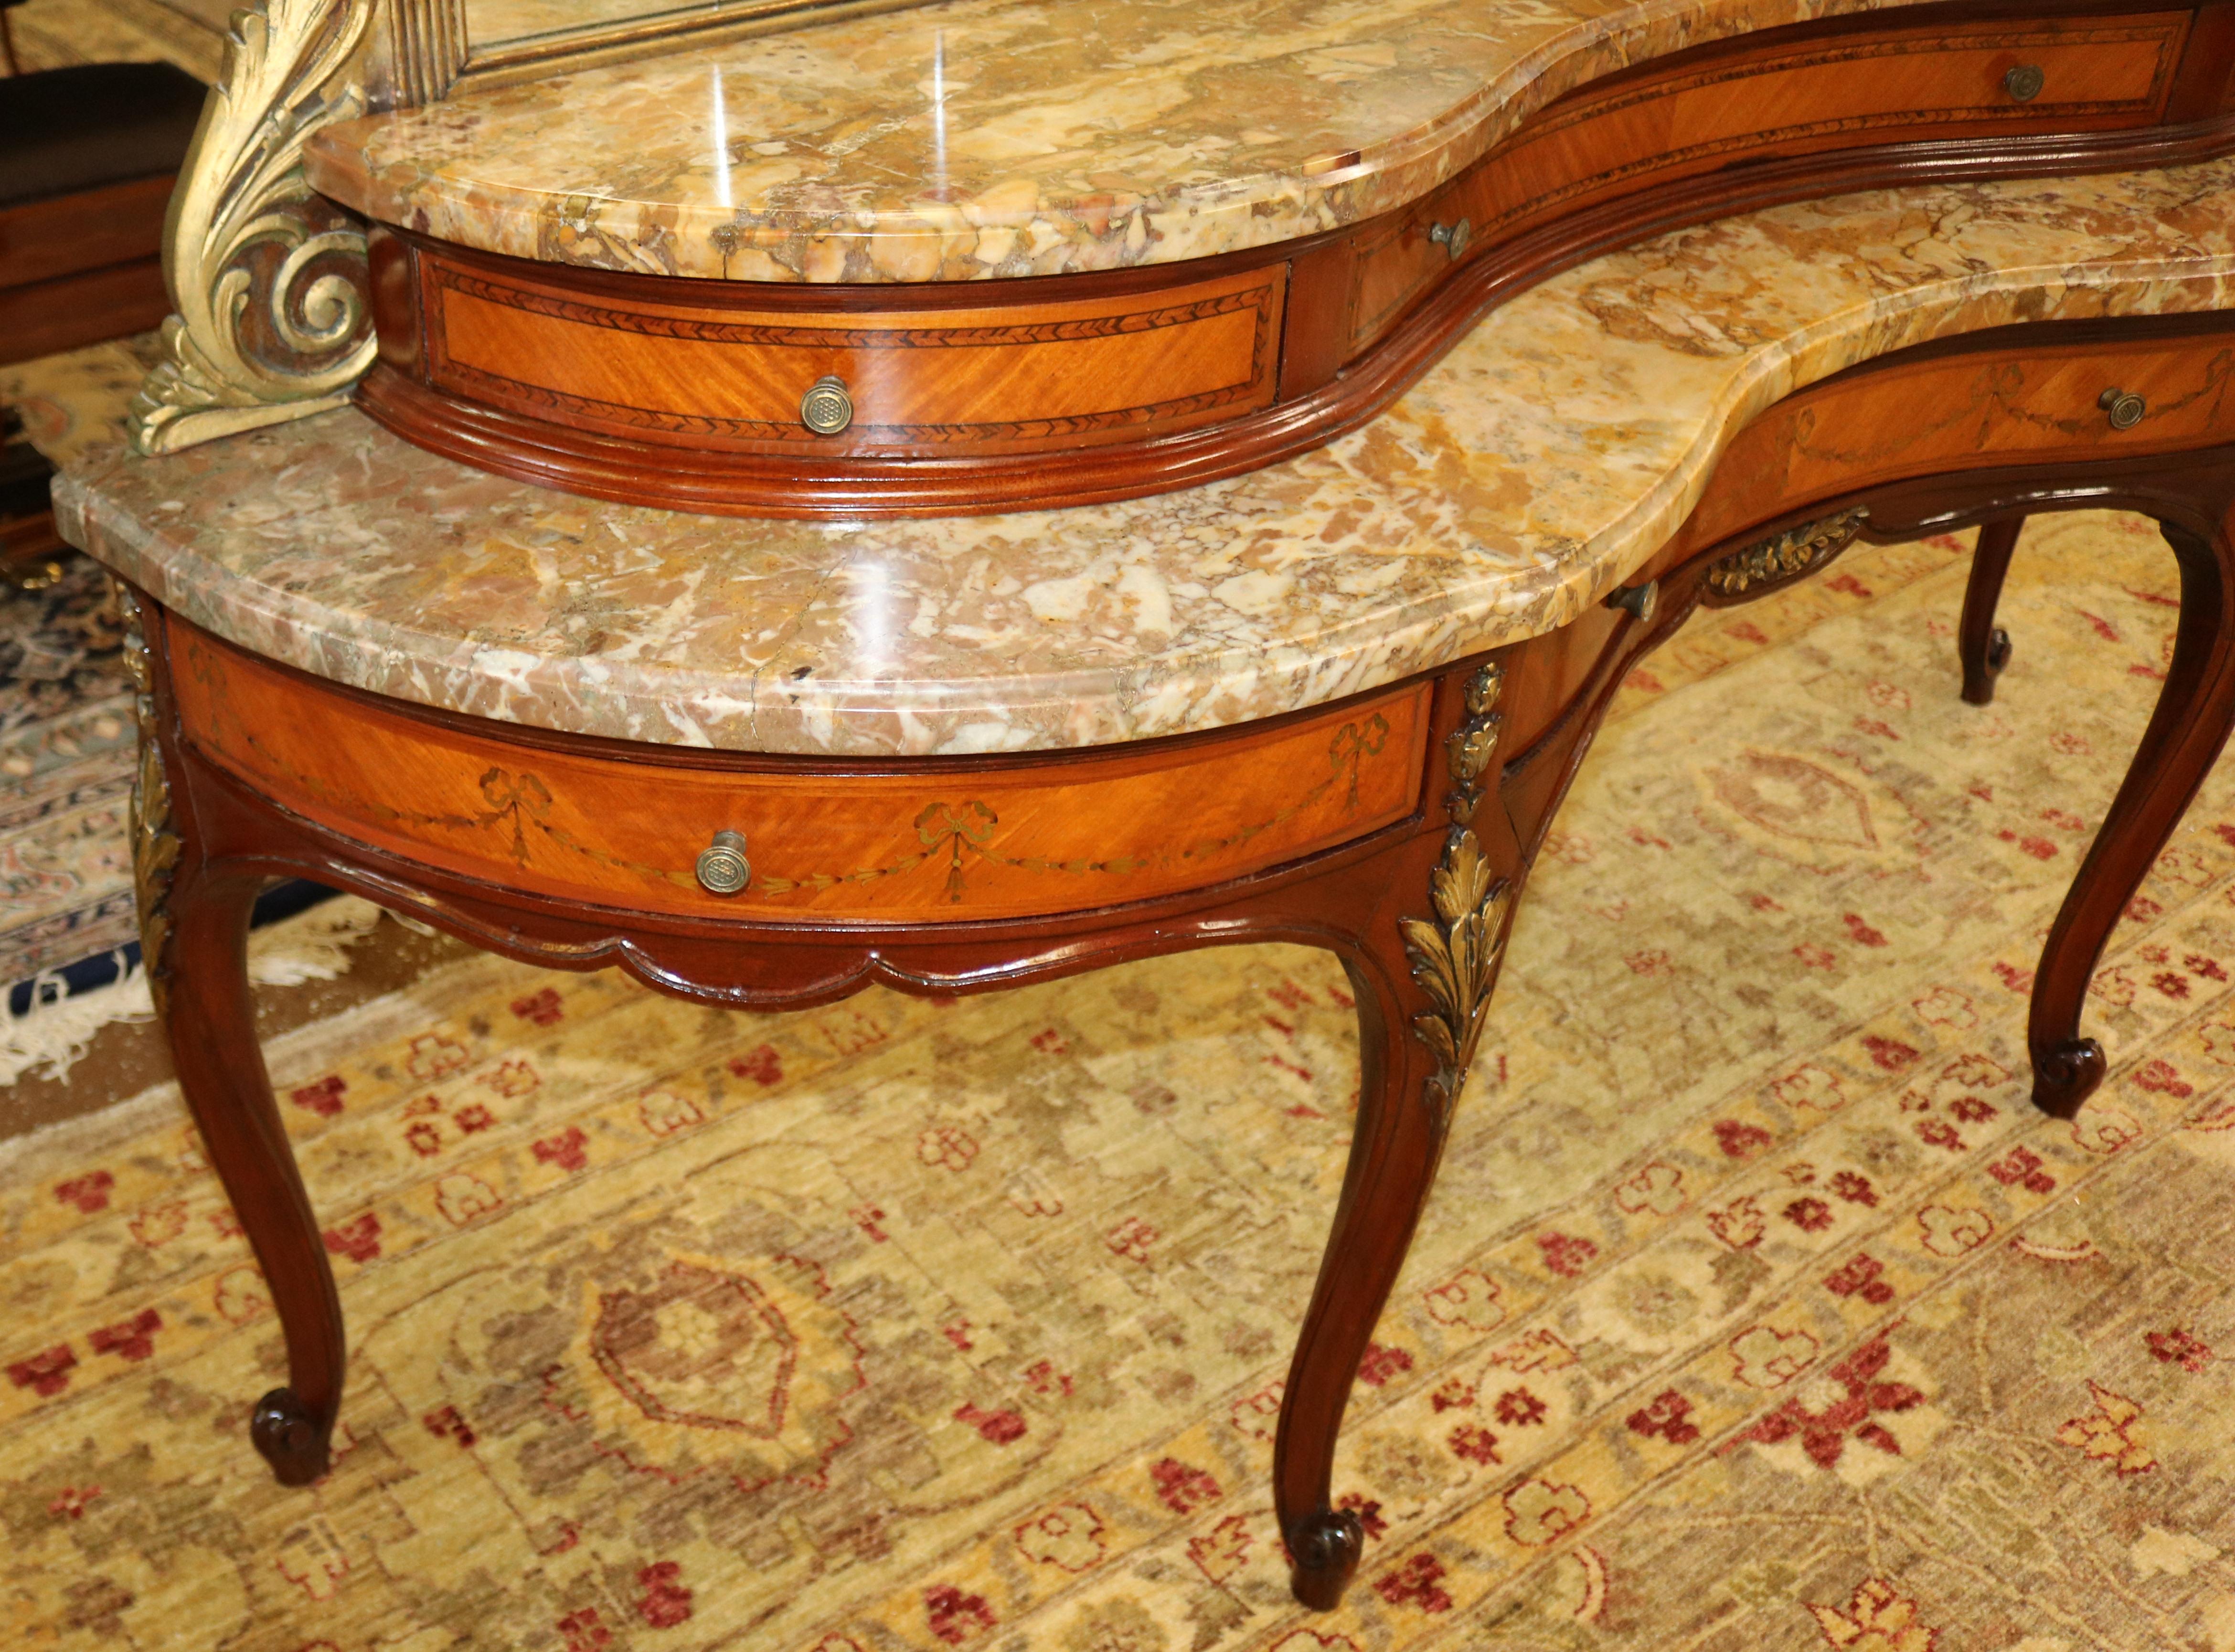 Etched Gold Mirror Marble Top Kingwood Vanity Circa 1920 For Sale 11